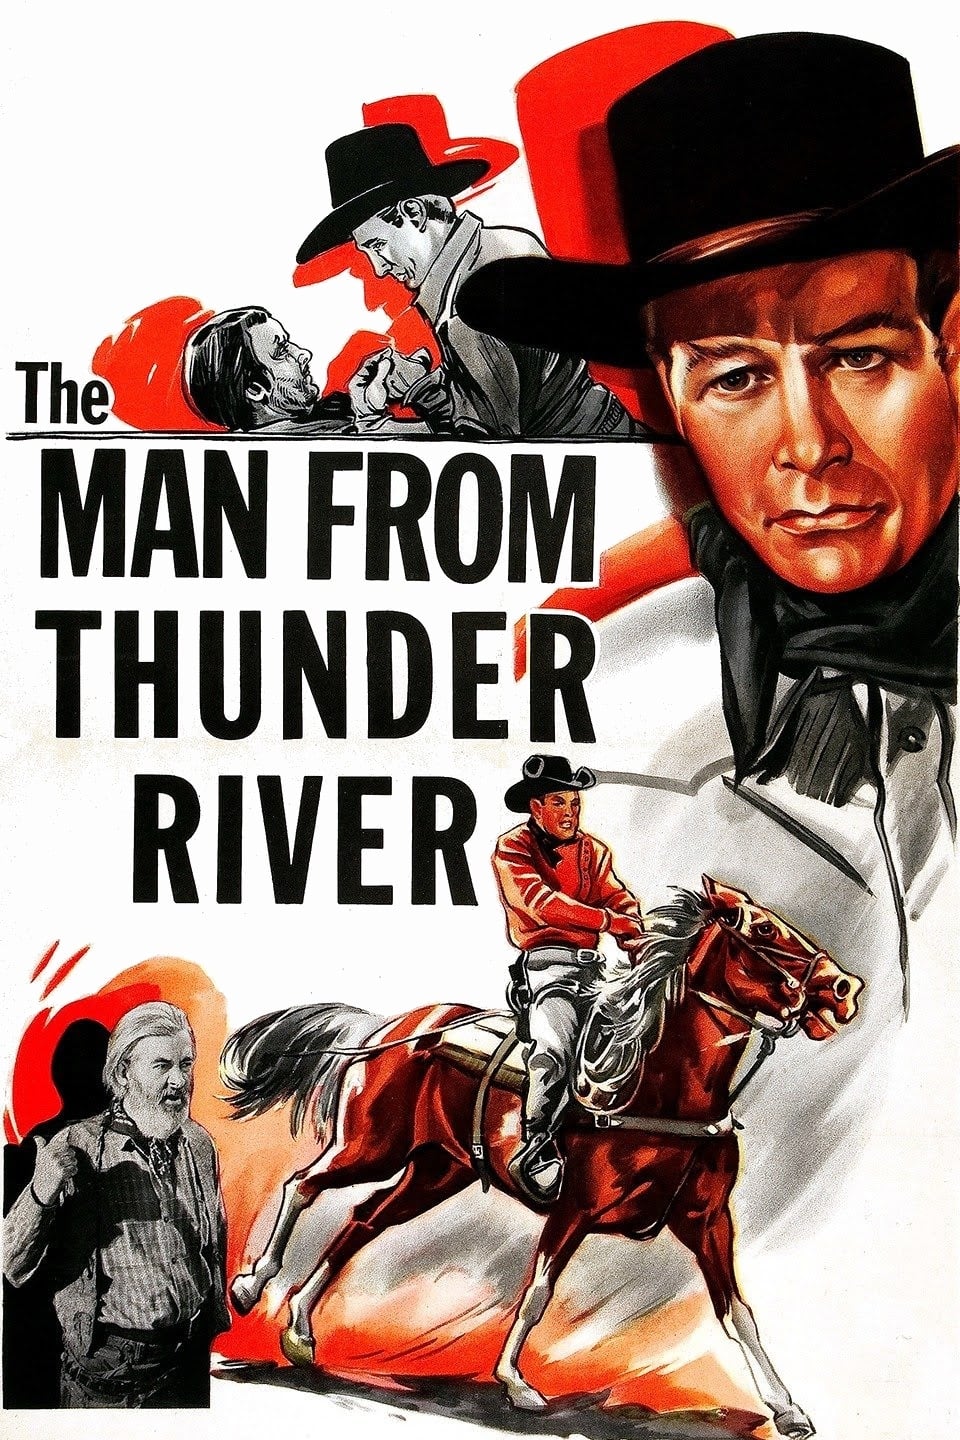 The Man from Thunder River (1943)